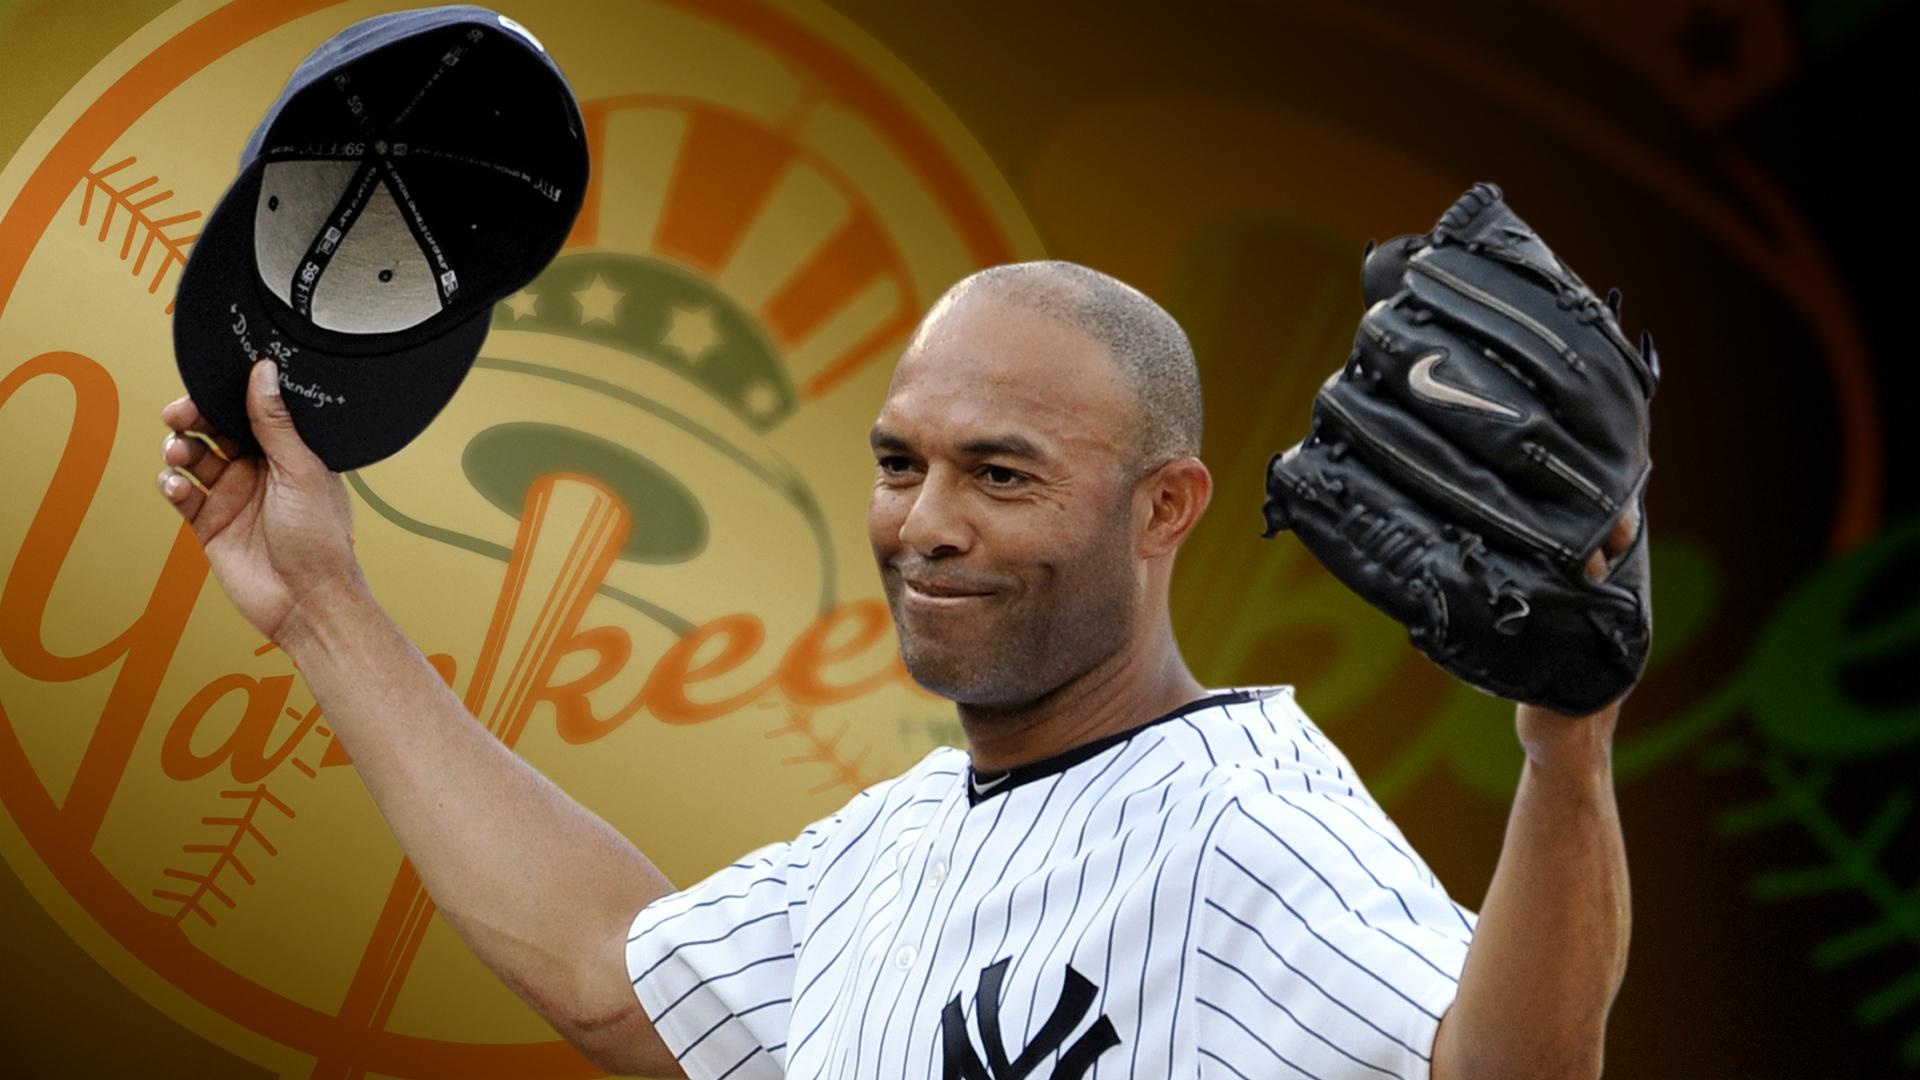 Mariano Rivera, Unanimous Hall of Famer, MLB legends, Hall of Fame induction, 1920x1080 Full HD Desktop